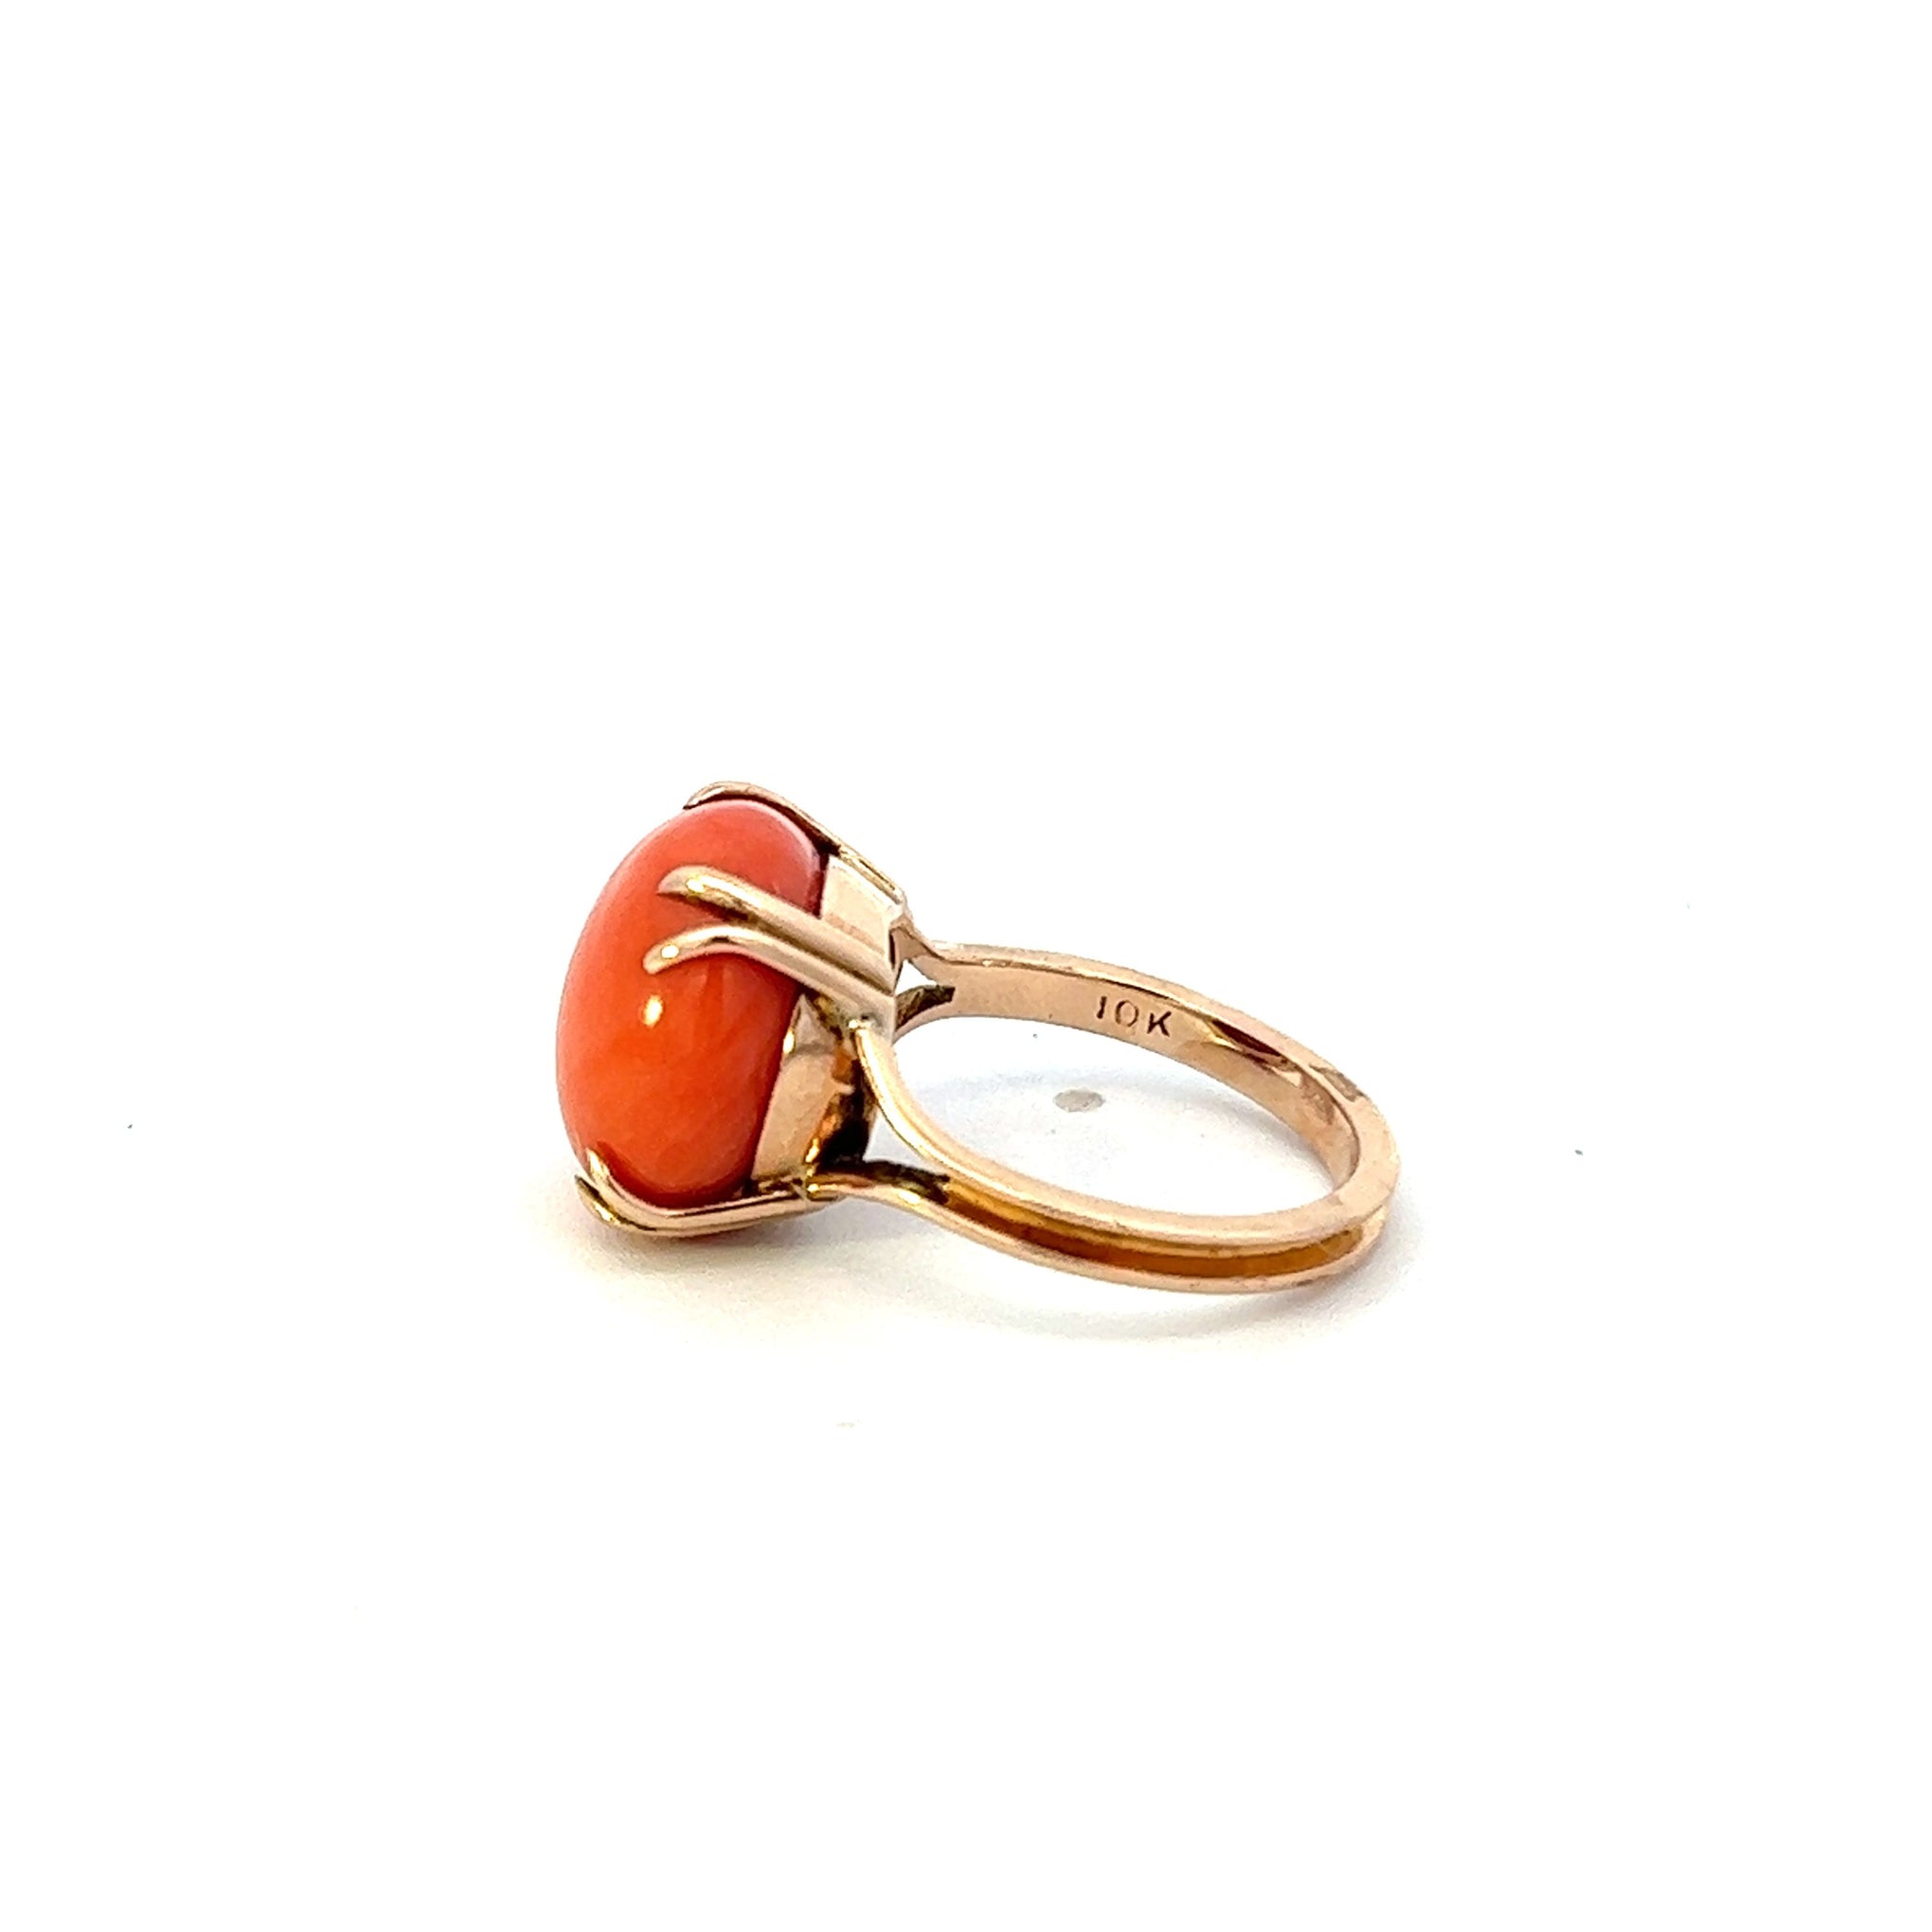 Vintage 10KT Yellow Gold Coral Ring